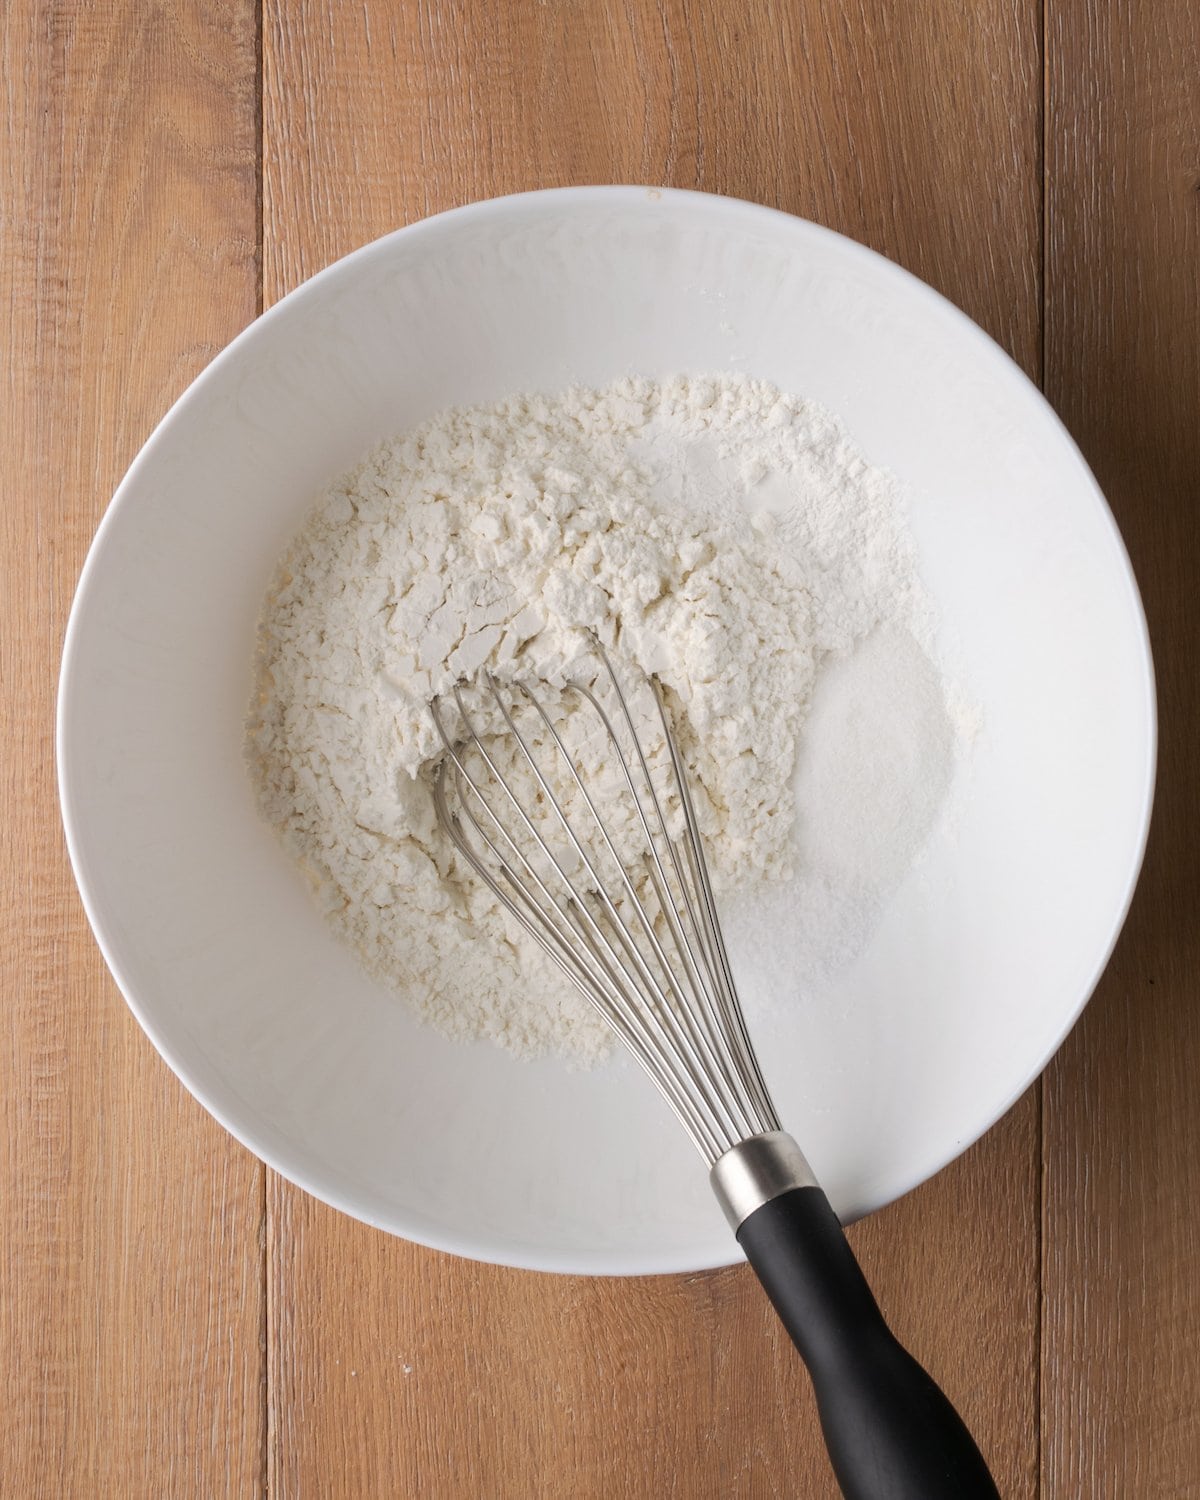 The dry ingredients for butter swim biscuits are whisked together in a white bowl.